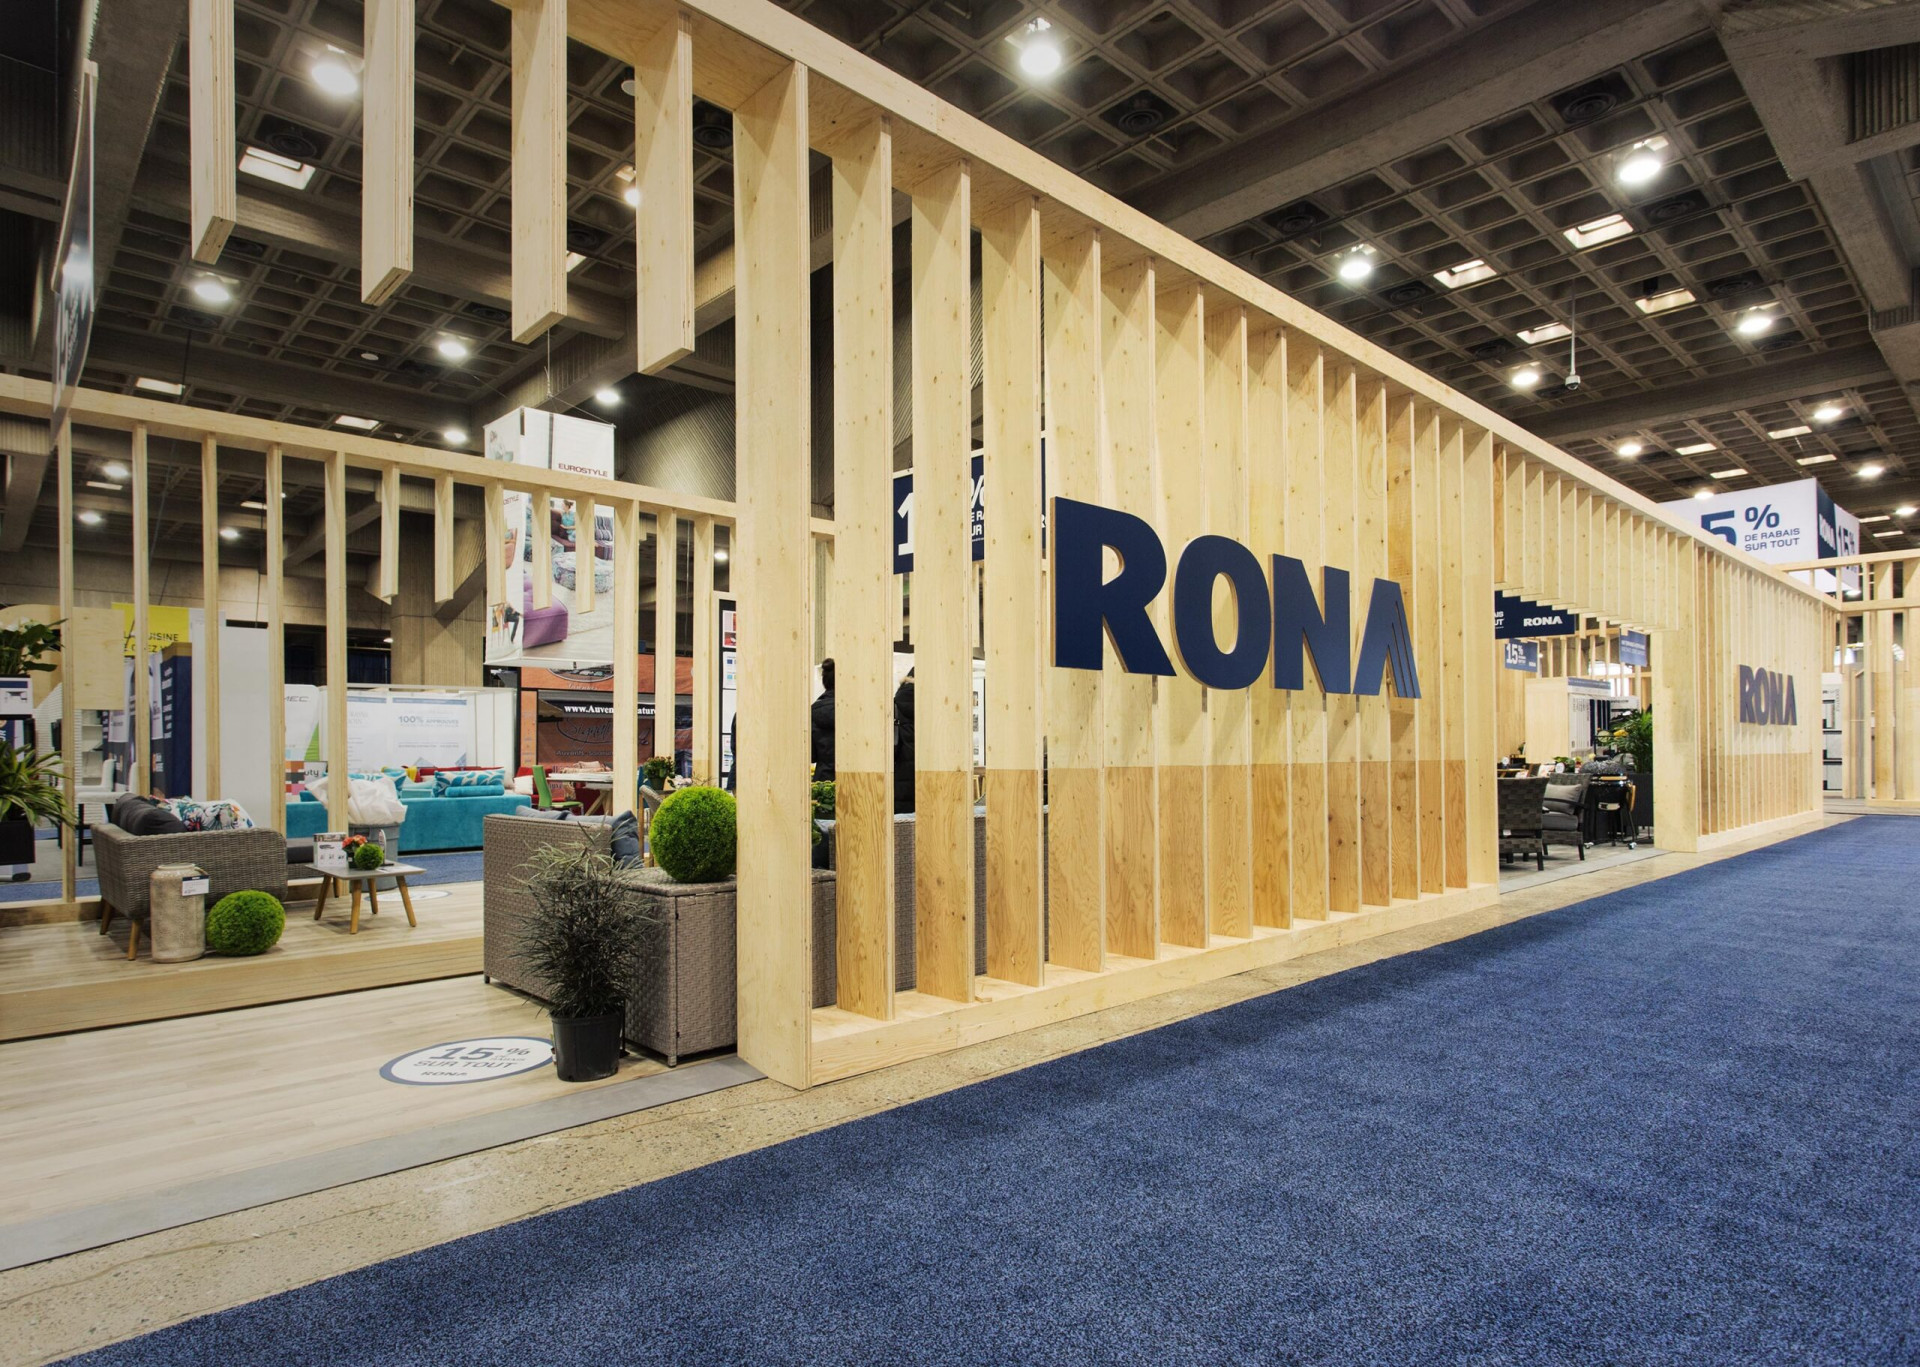 RONA - Always there for your projects